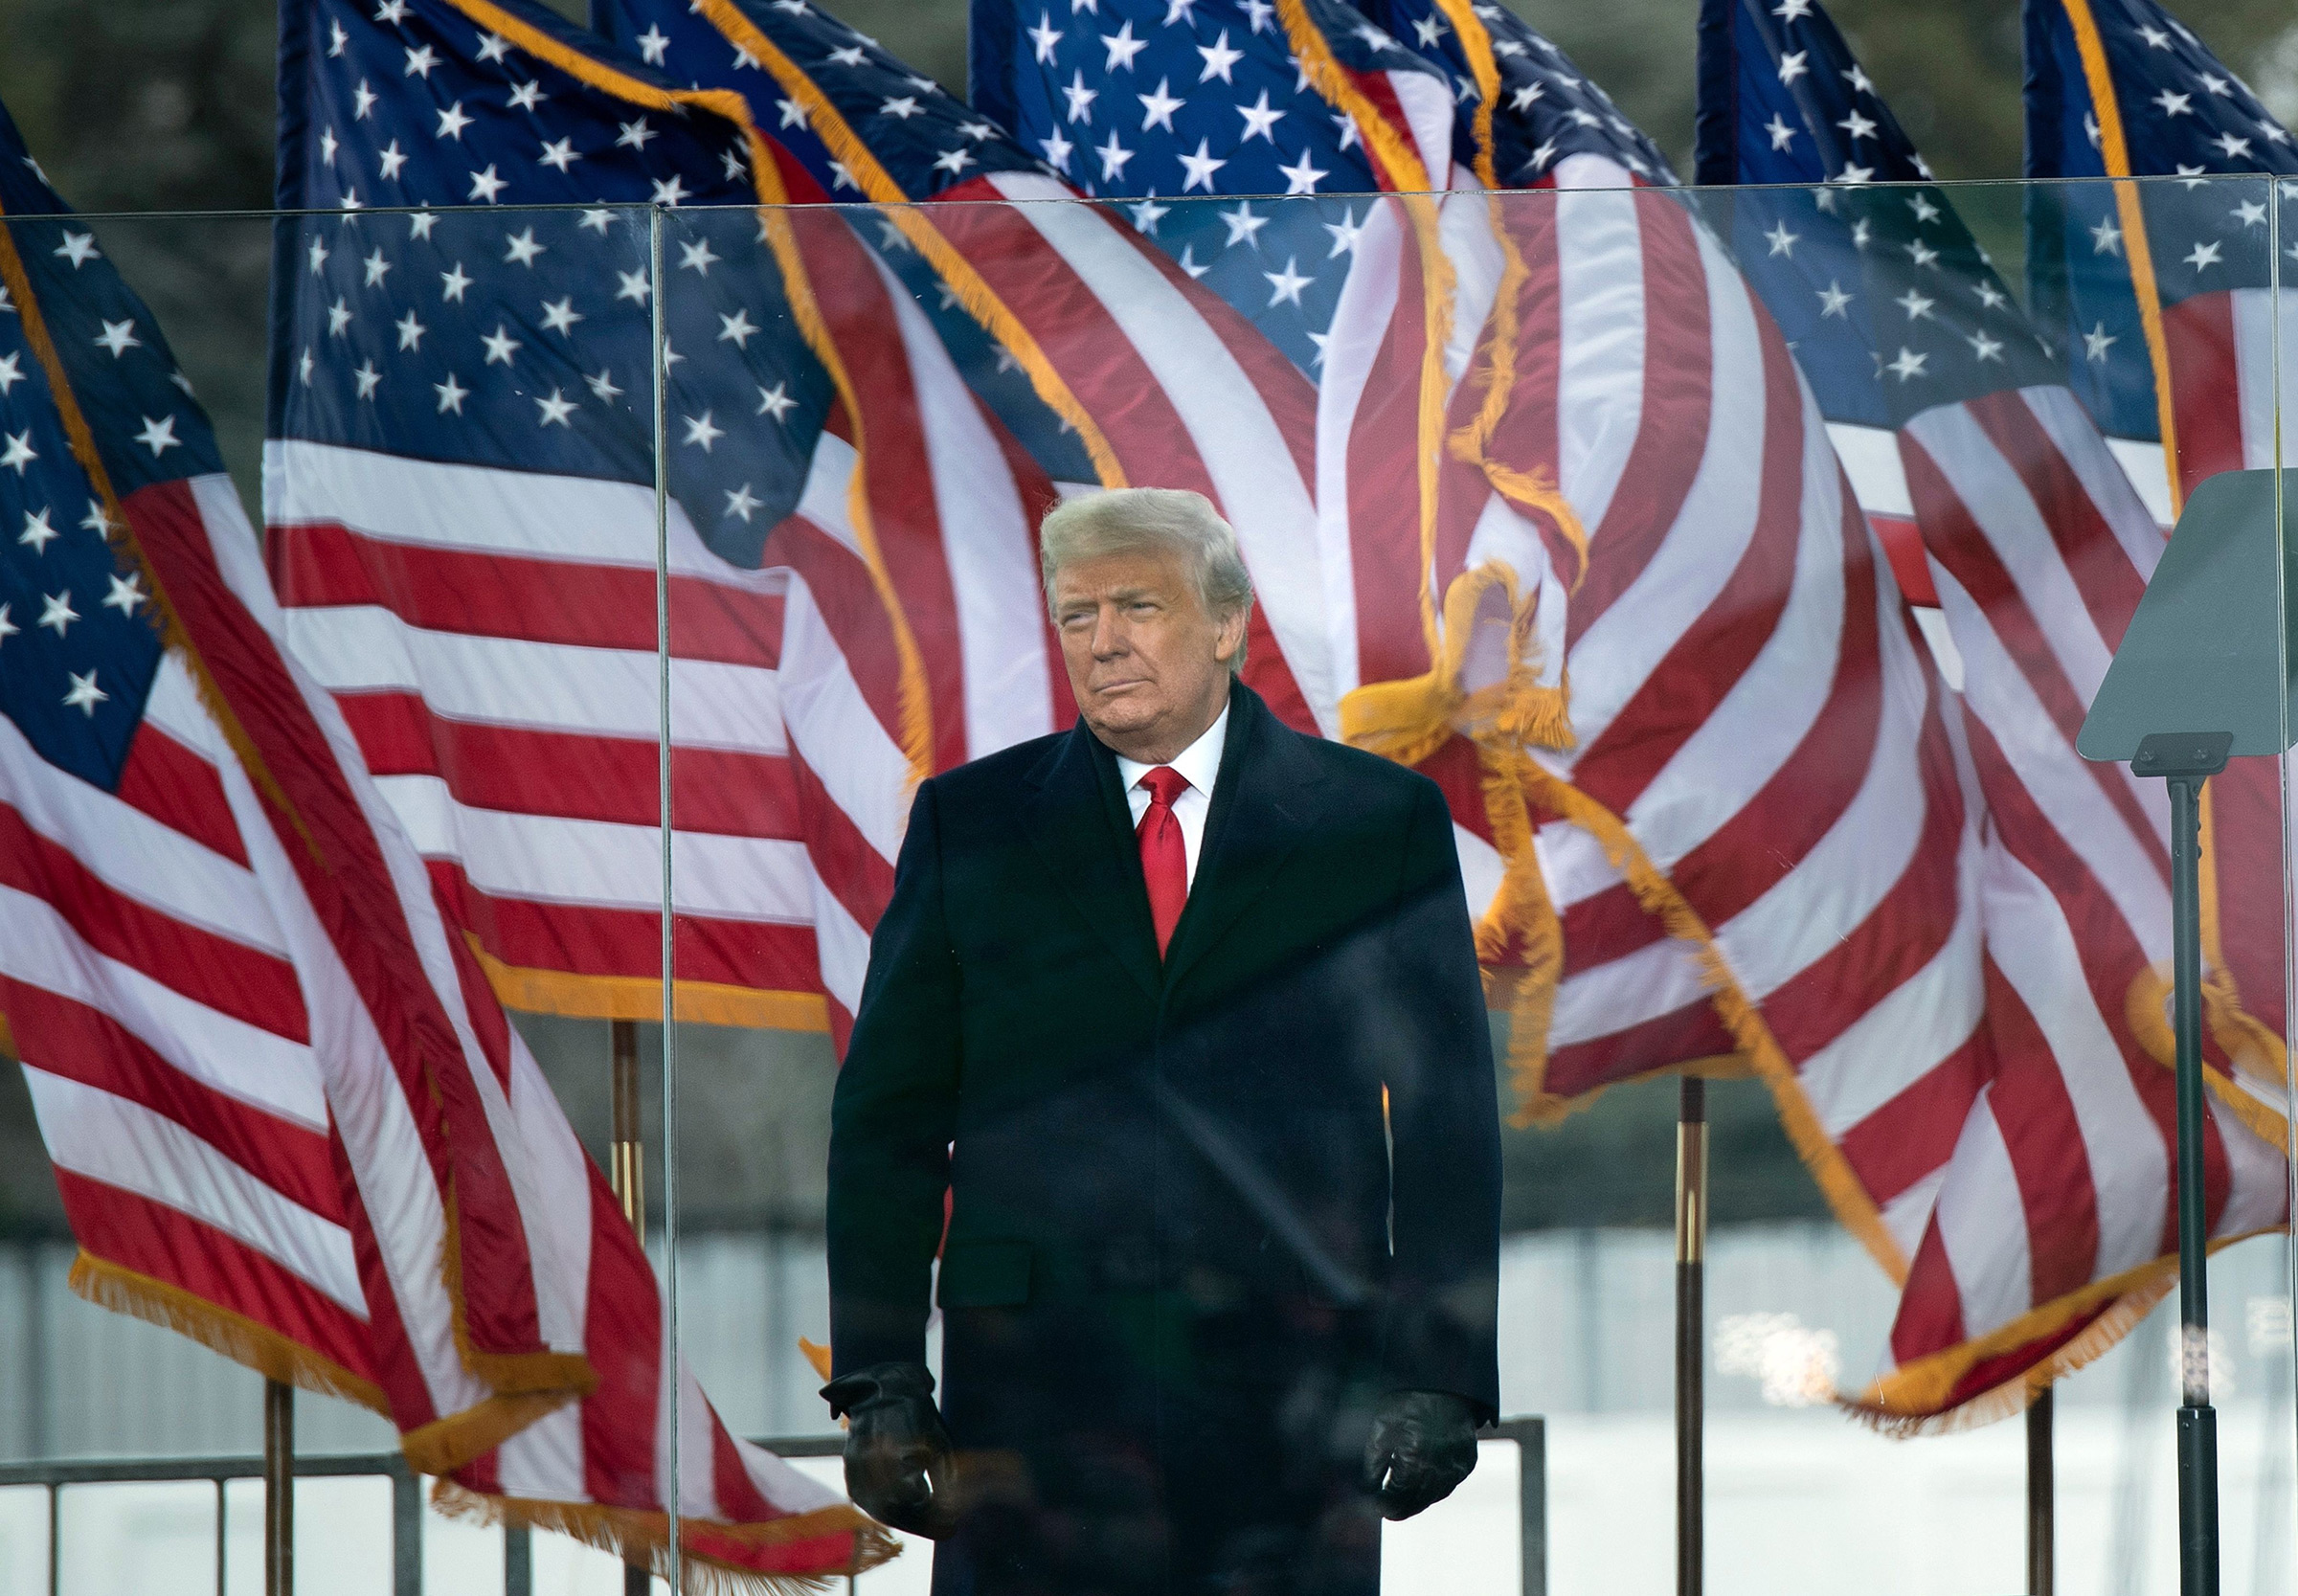 US President Donald Trump arrives to speak to supporters from The Ellipse near the White House in Washington, DC., on Jan. 6, 2021. (Brendan Smialowski—AFP/Getty Images)